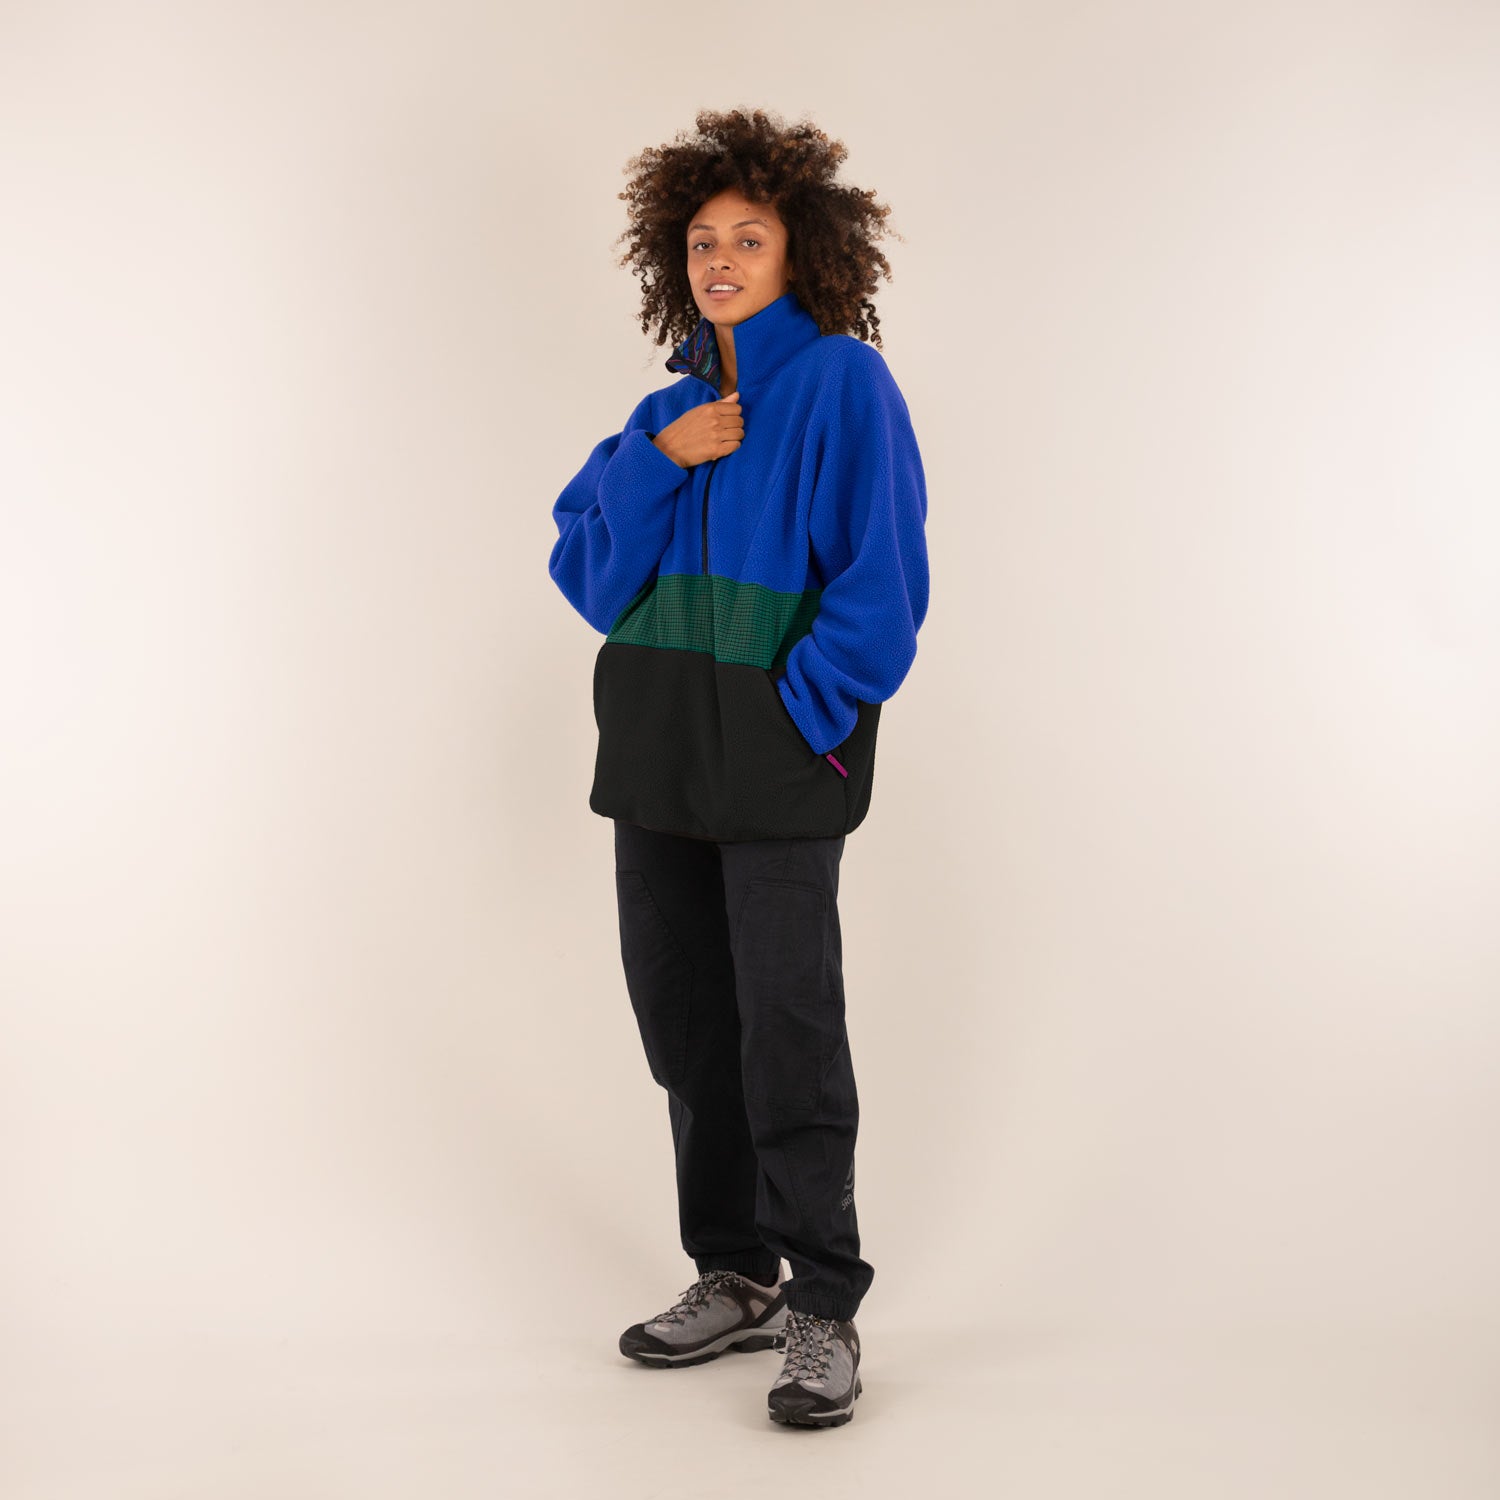 ALEX | Unisex Half Zip Fleece | 3RD ROCK Clothing -  Kendal is 5ft 7" with a 36" chest, 28" waist, 38" hips measuring S-M on the size chart. Here she wears a size L for a more oversized fit. F